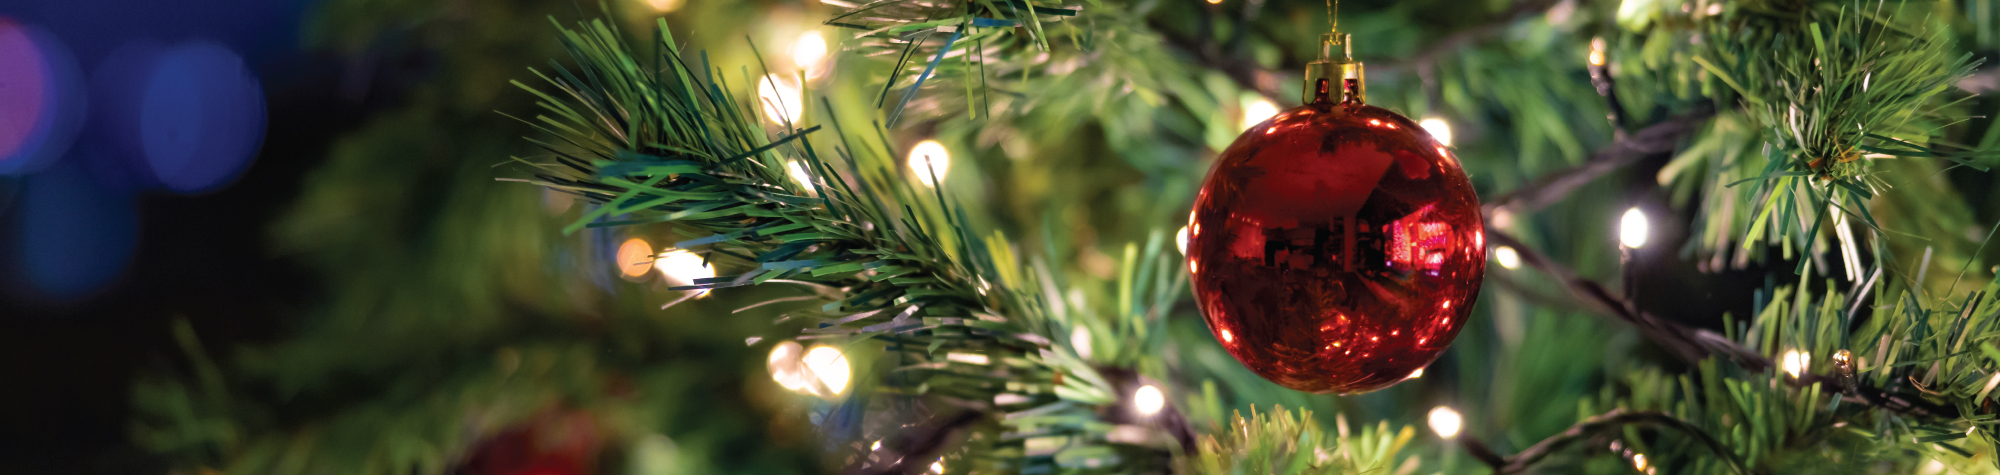 10 Tips for Christmas Tree Fire Safety